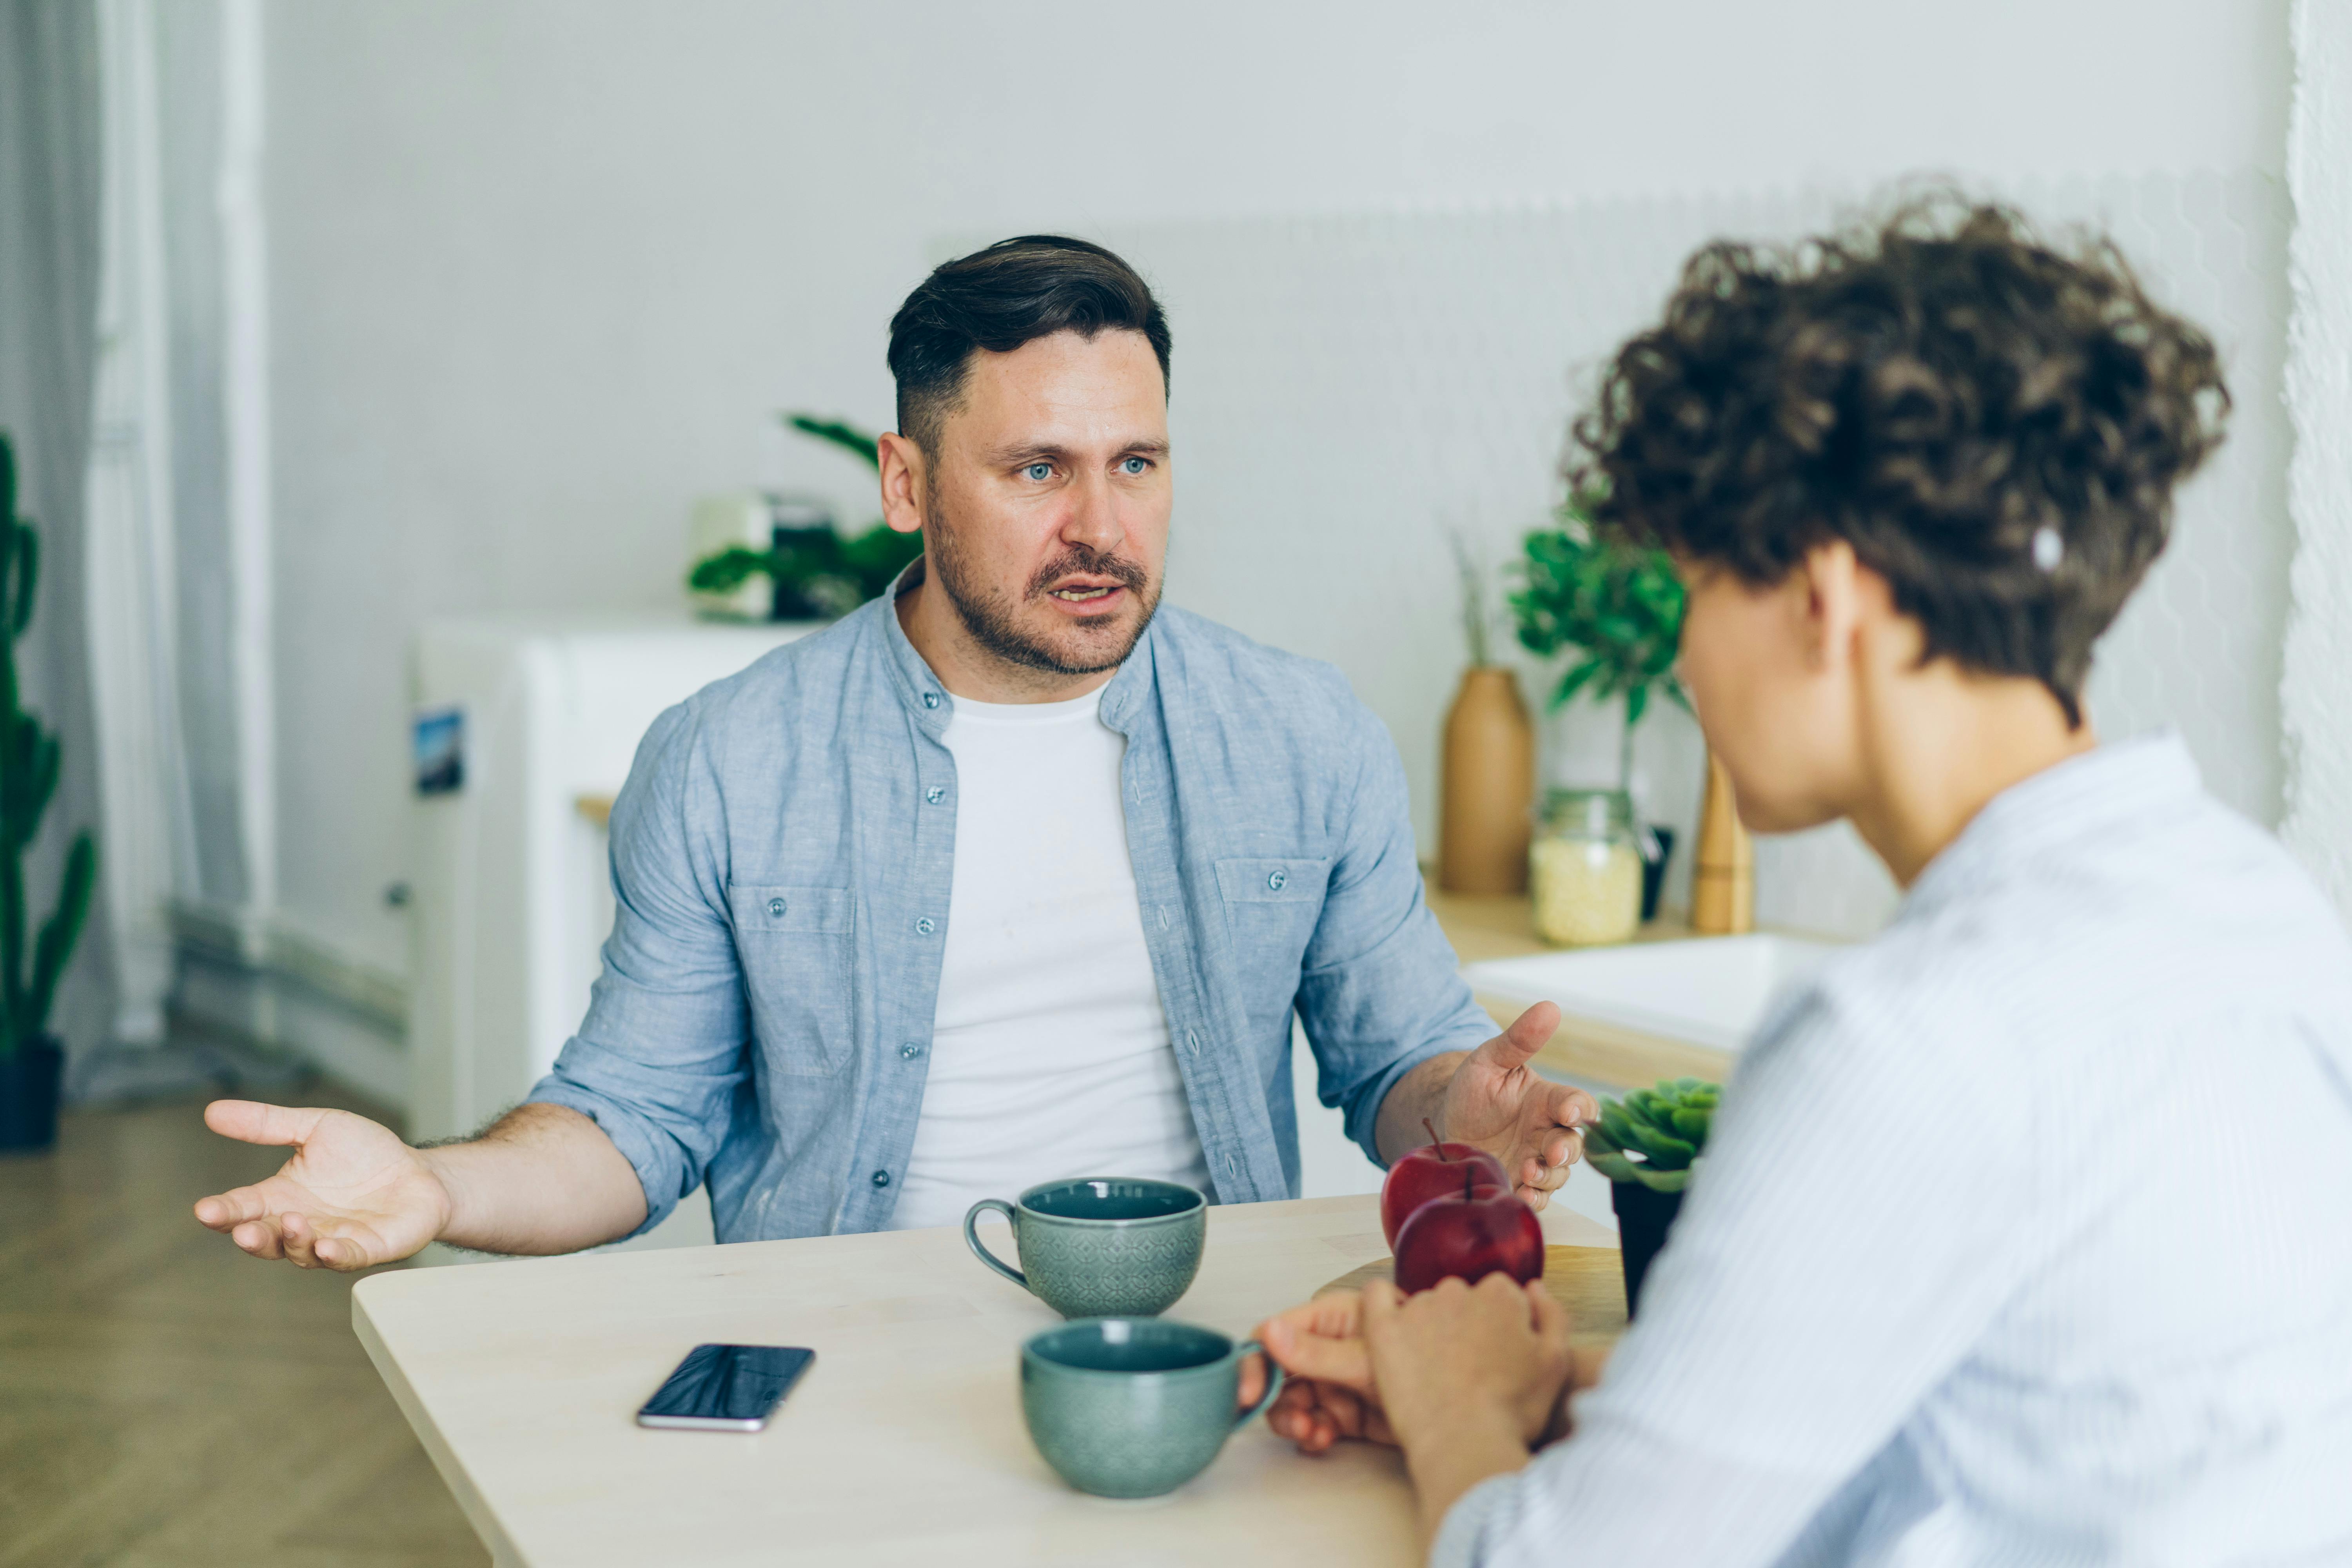 A couple having a serious and difficult conversation | Source: Pexels